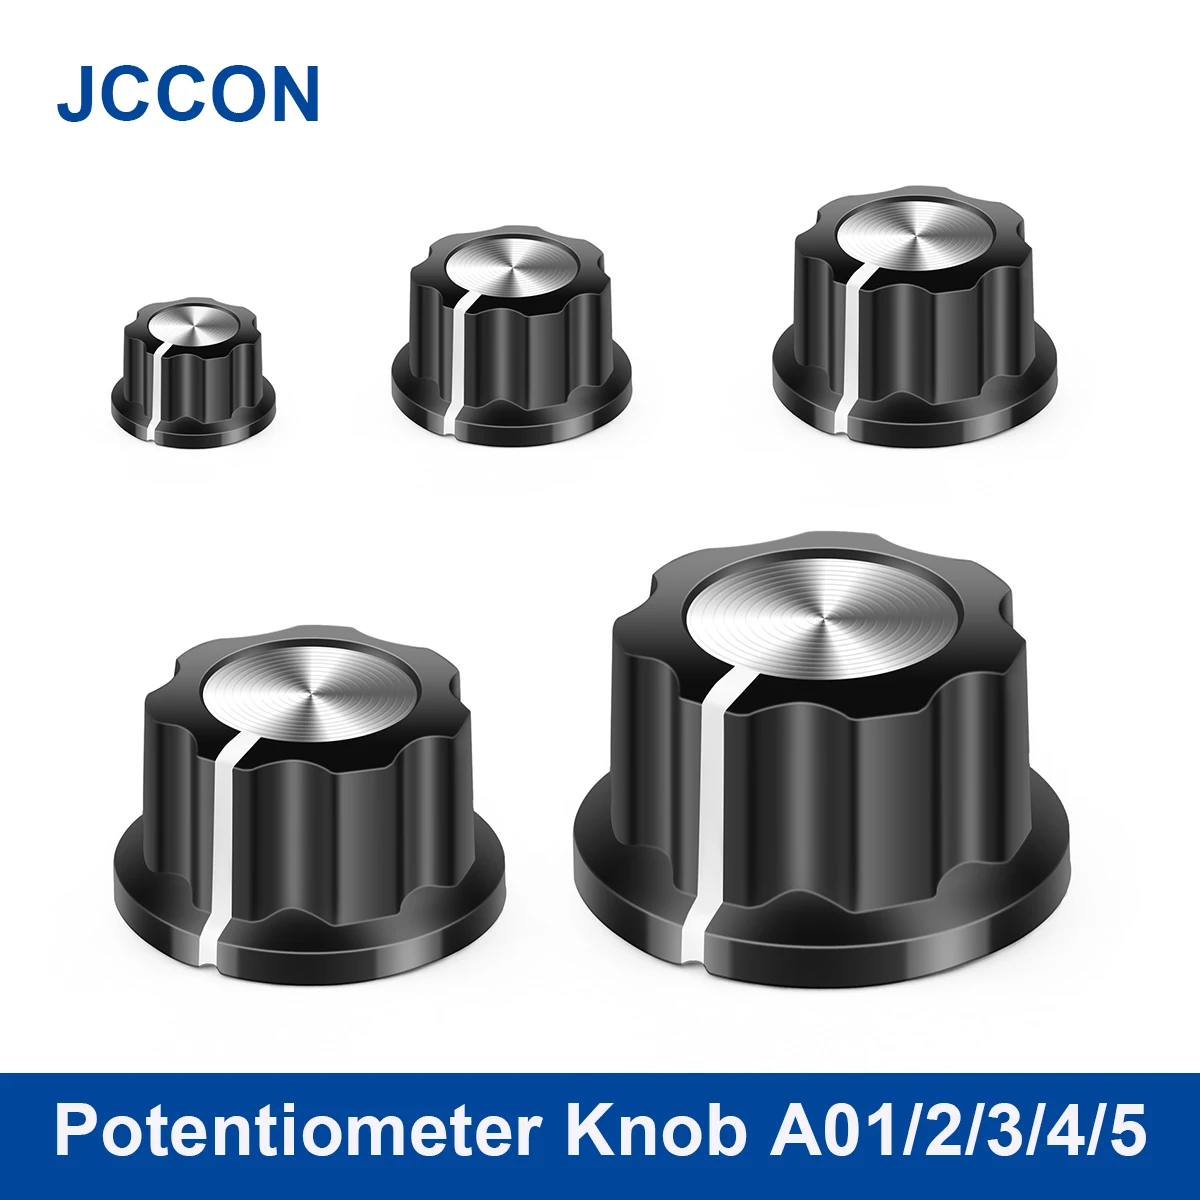 

5Pcs Potentiometer Knob MF-A01 MF-A02 MF-A03 MF-A04 MF-A05 For WH118/WX050 /3590S/RV24YN20S/WXD3 Rotary Switch 6mm